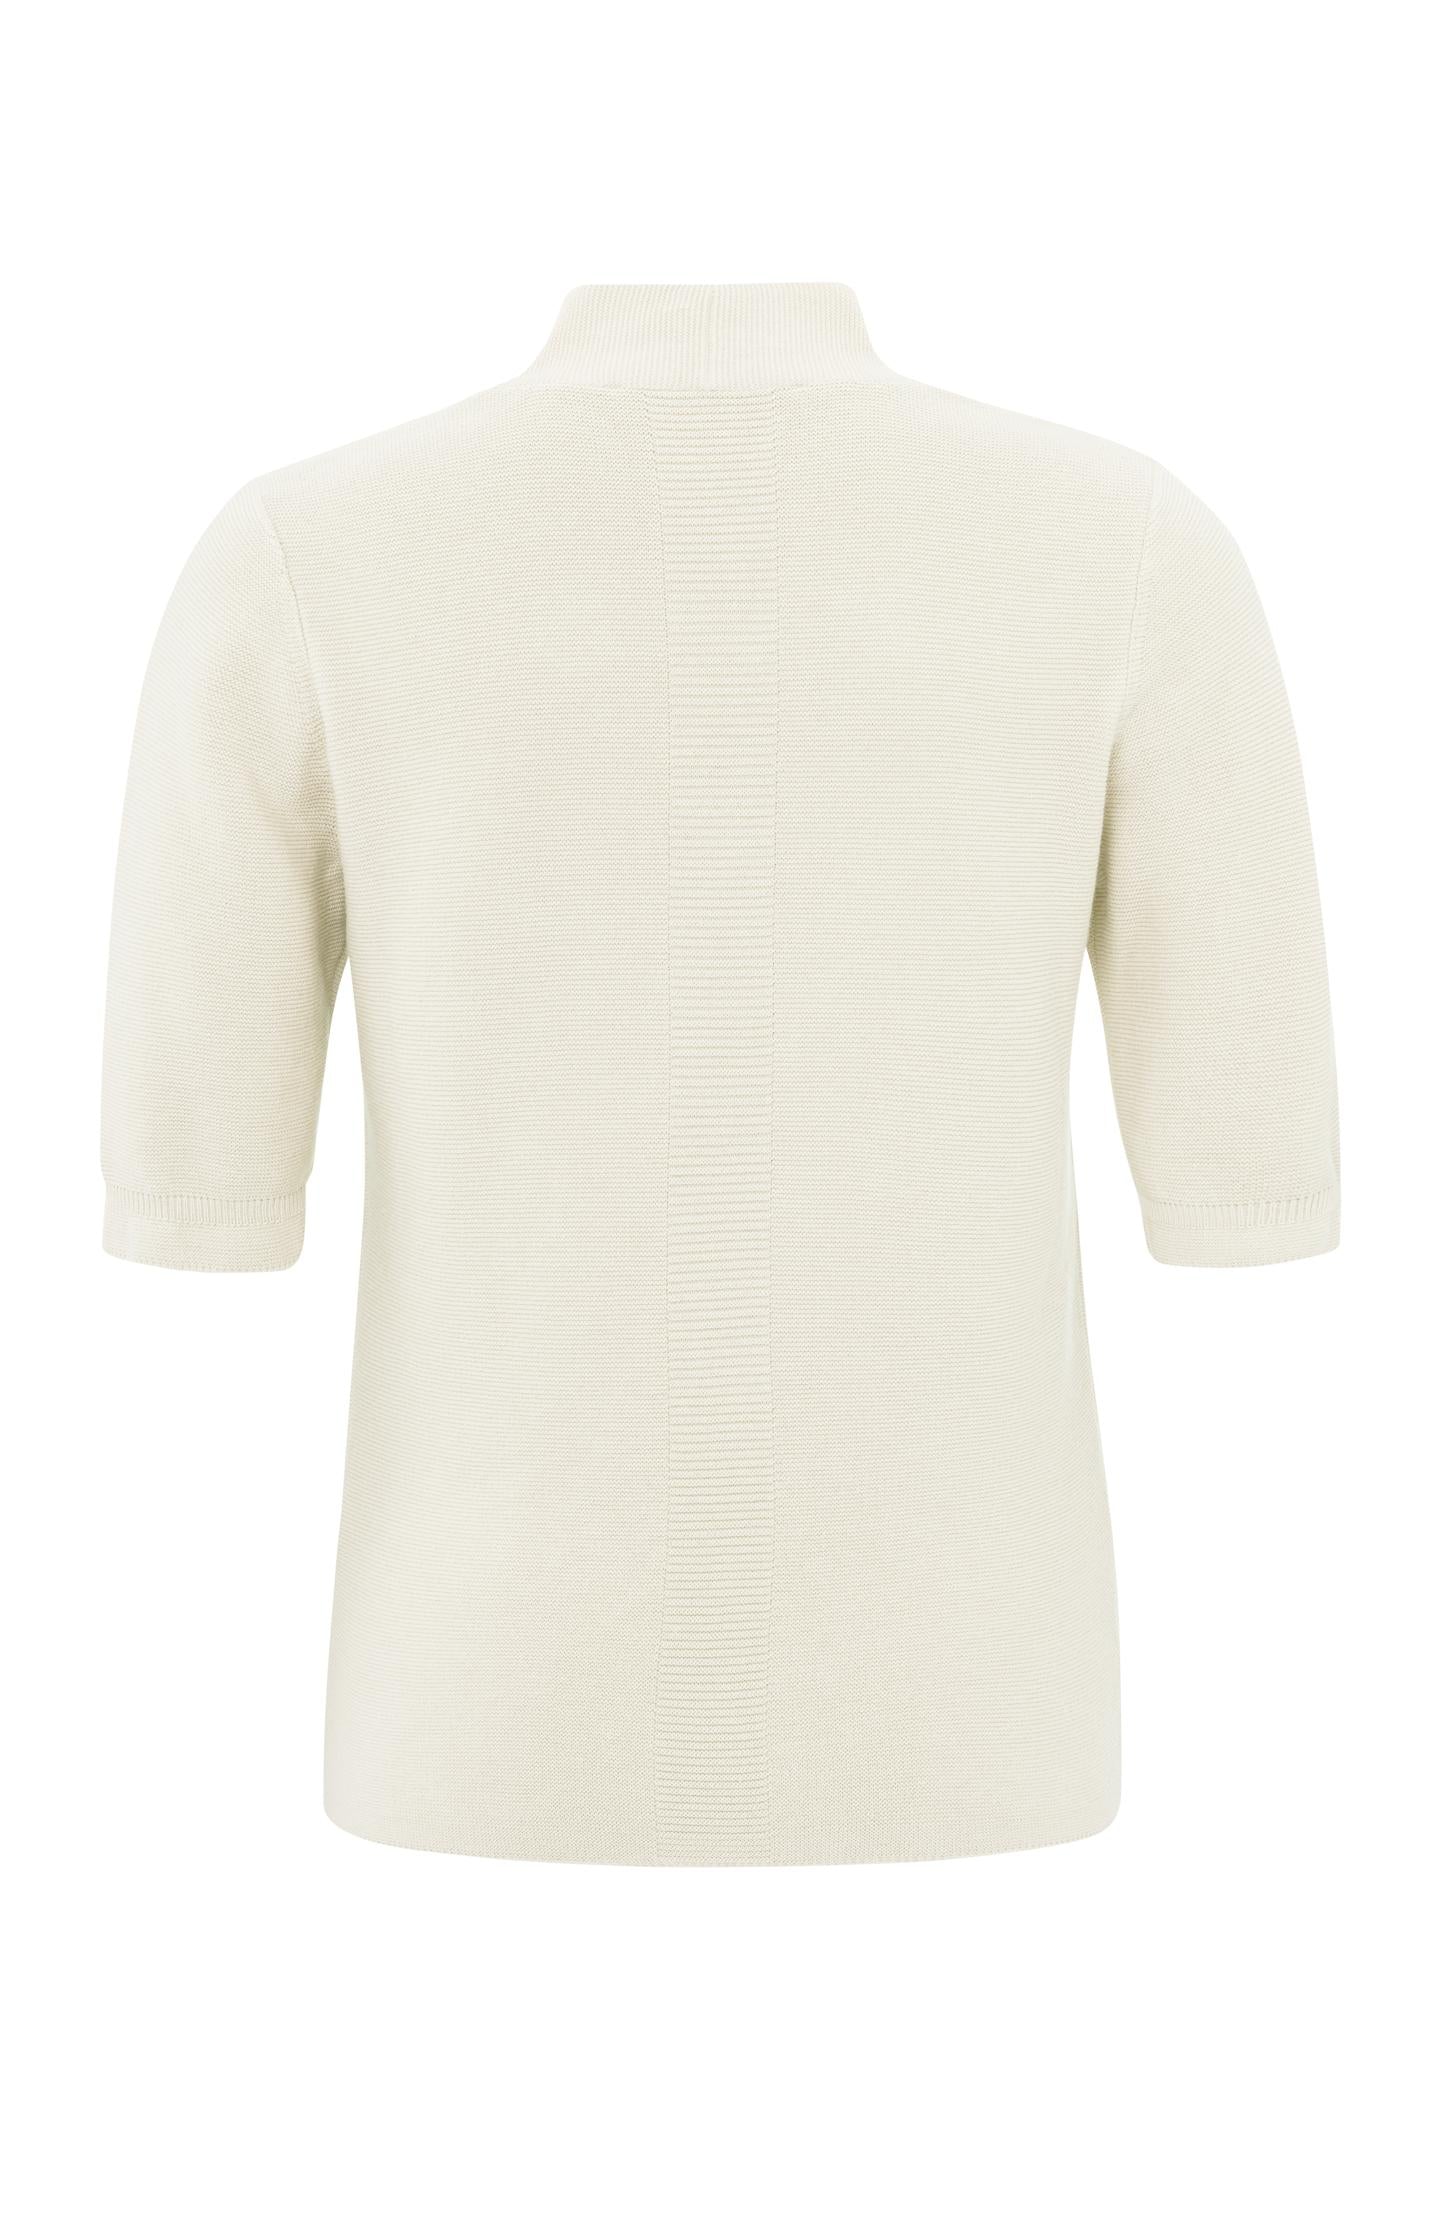 cotton-sweater-with-v-neck-and-halflong-sleeves-with-detail-ivory-white_caa2ae44-aacd-4470-9a37-7b11cb7ba0f7_1440x